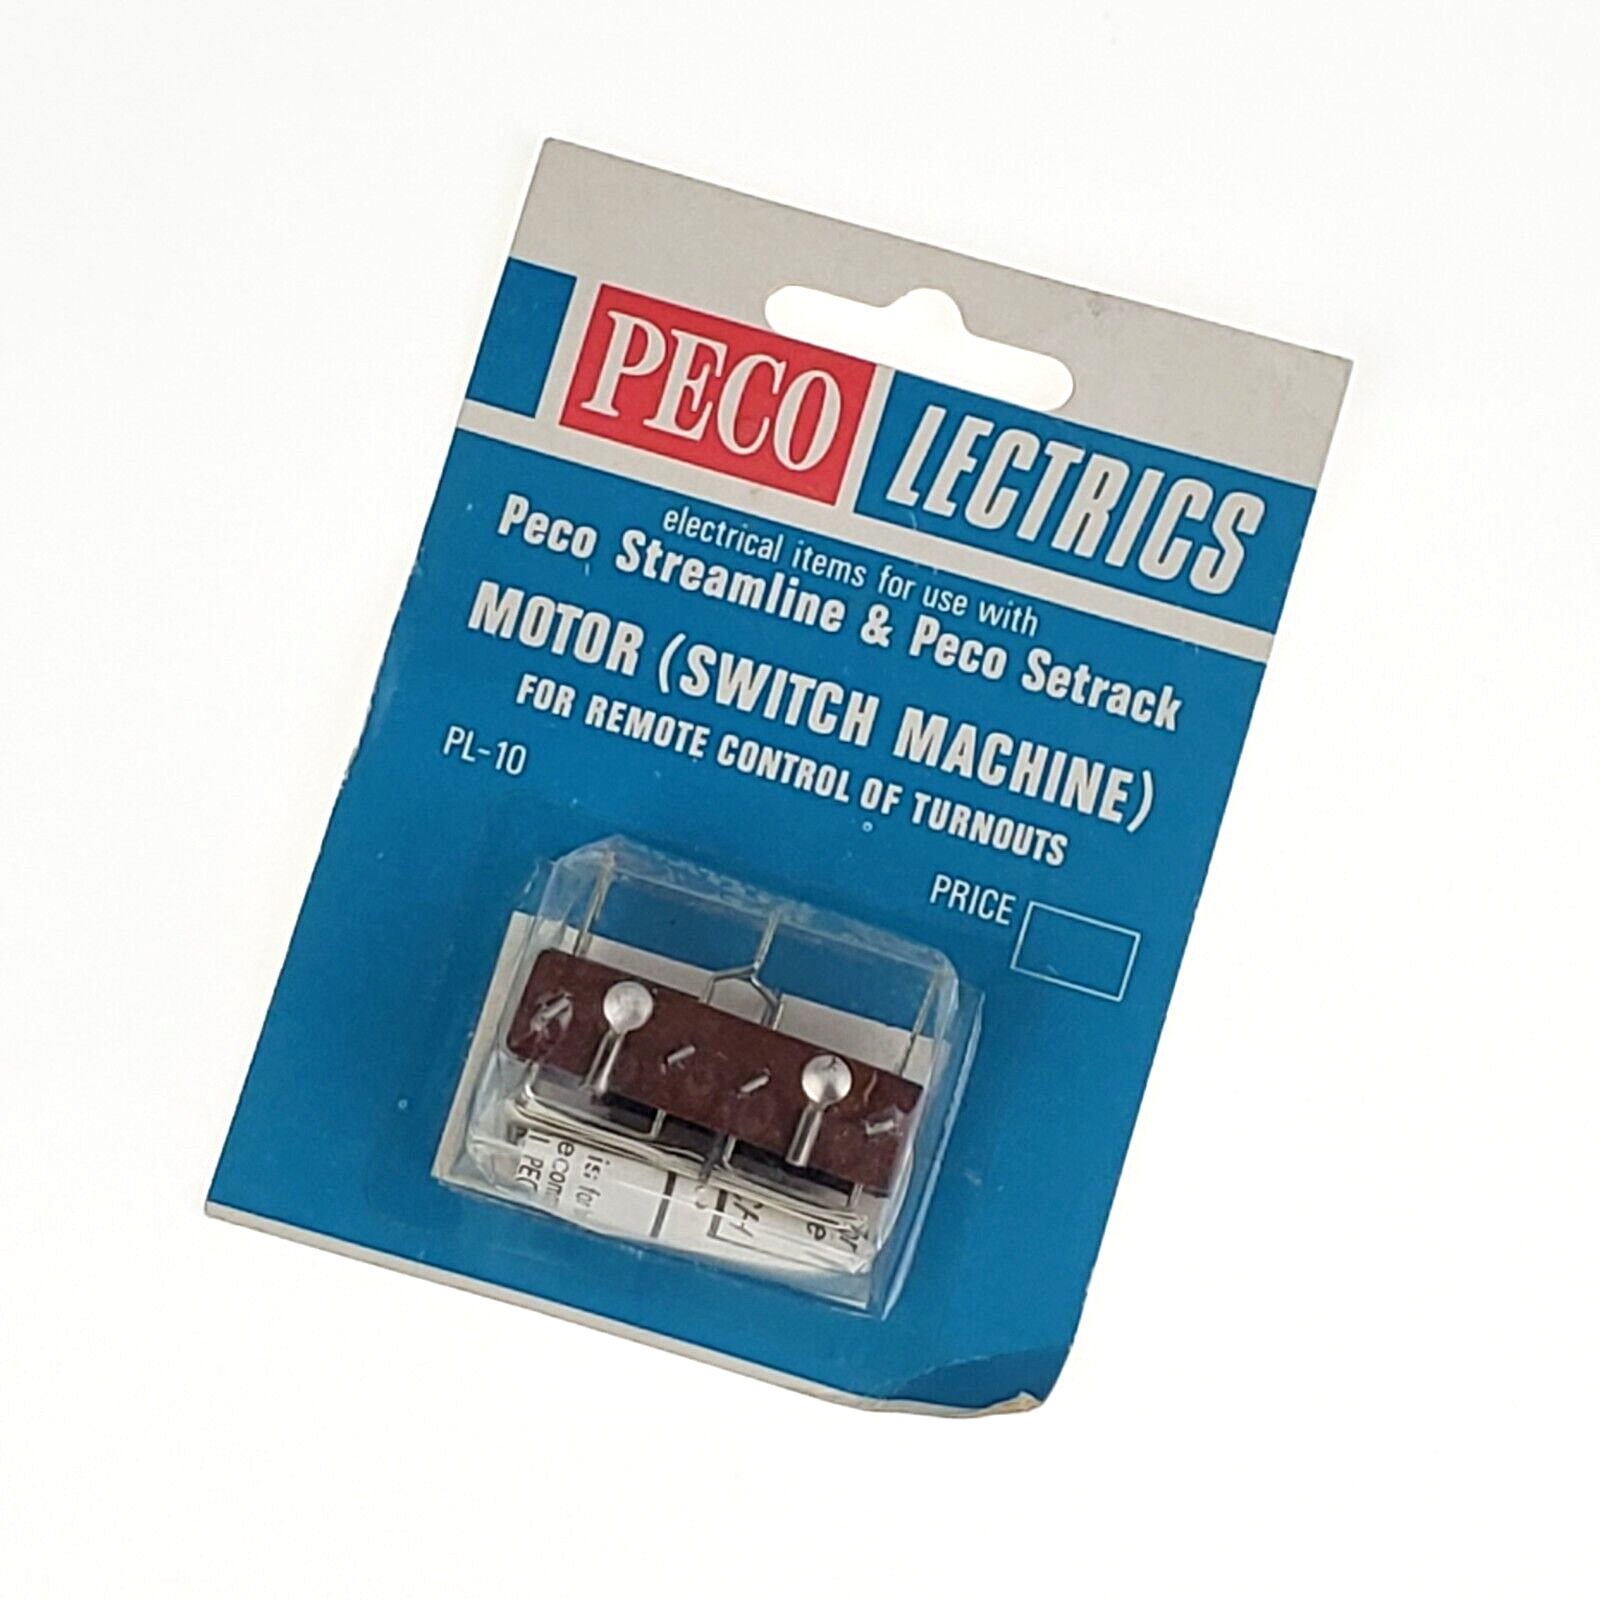 Peco Lectrics Motor Switch Machine Pl-10 - For Remote Control Turnouts Ho Scale